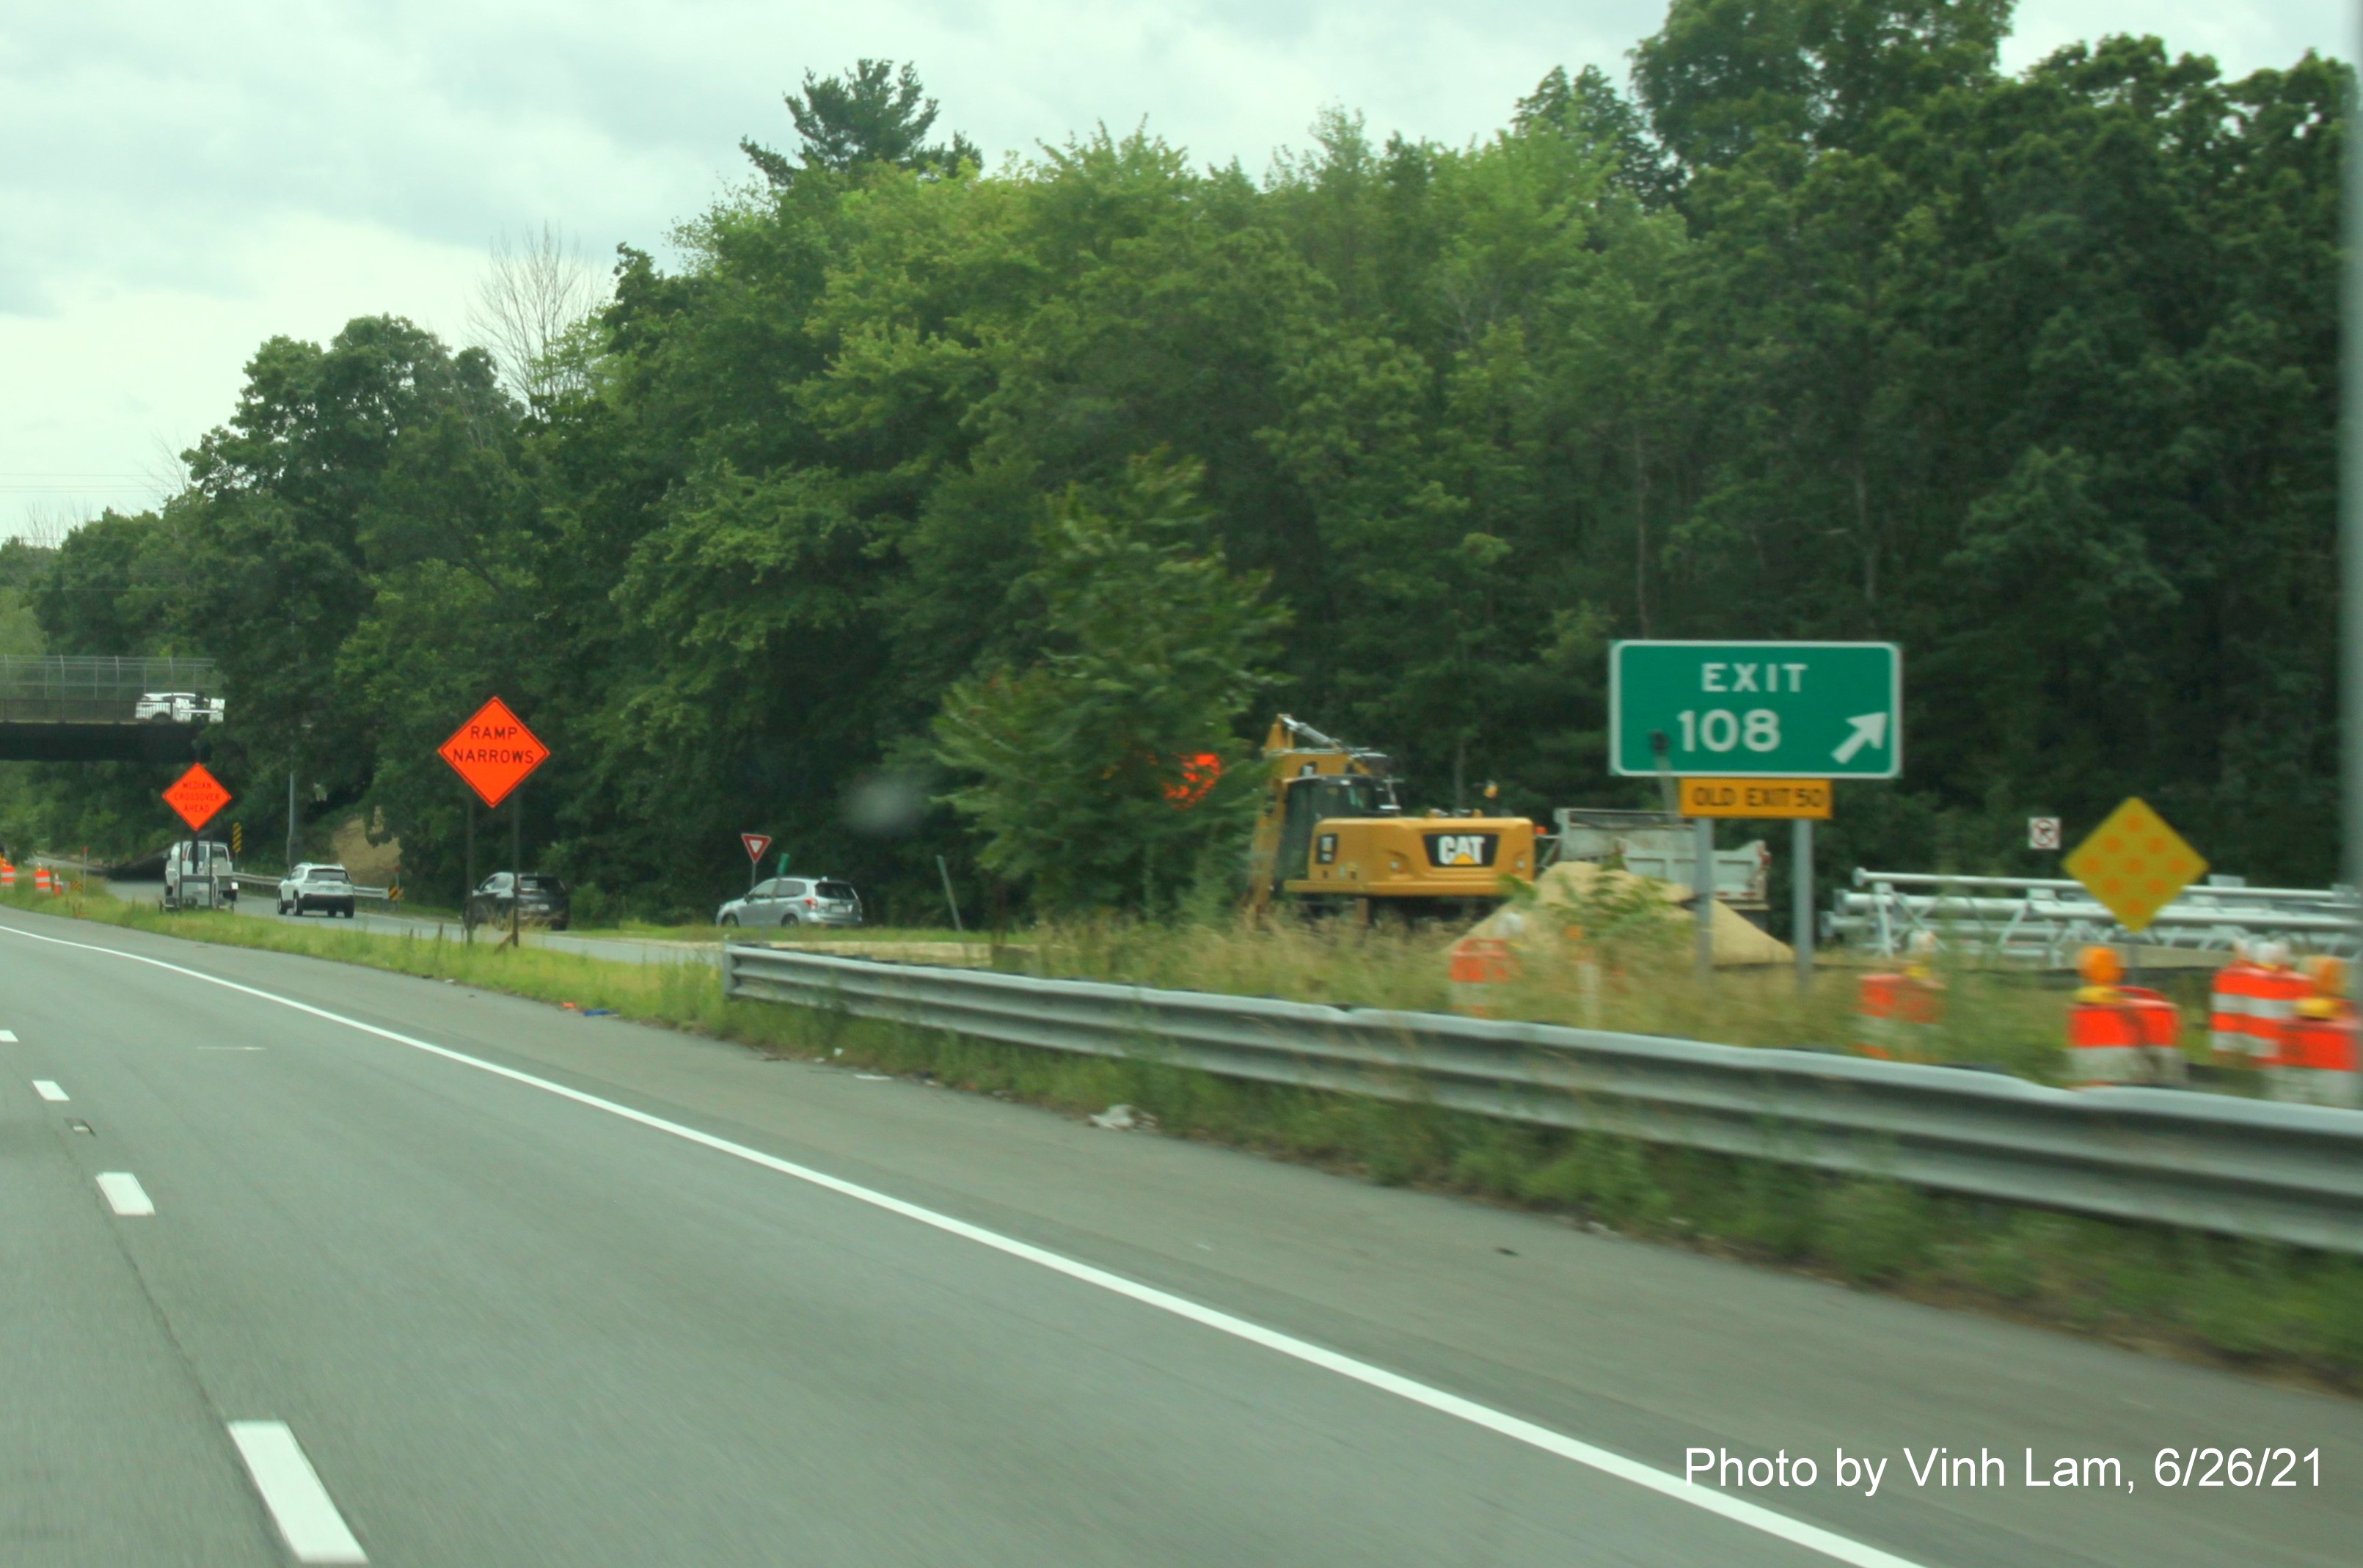 Image of gore sign on C/D lanes for MA 97 exit with new milepost based exit number and yellow Old Exit 50 sign below as seen from I-495 South in Haverhill, photo by Vinh Lam, June 2021